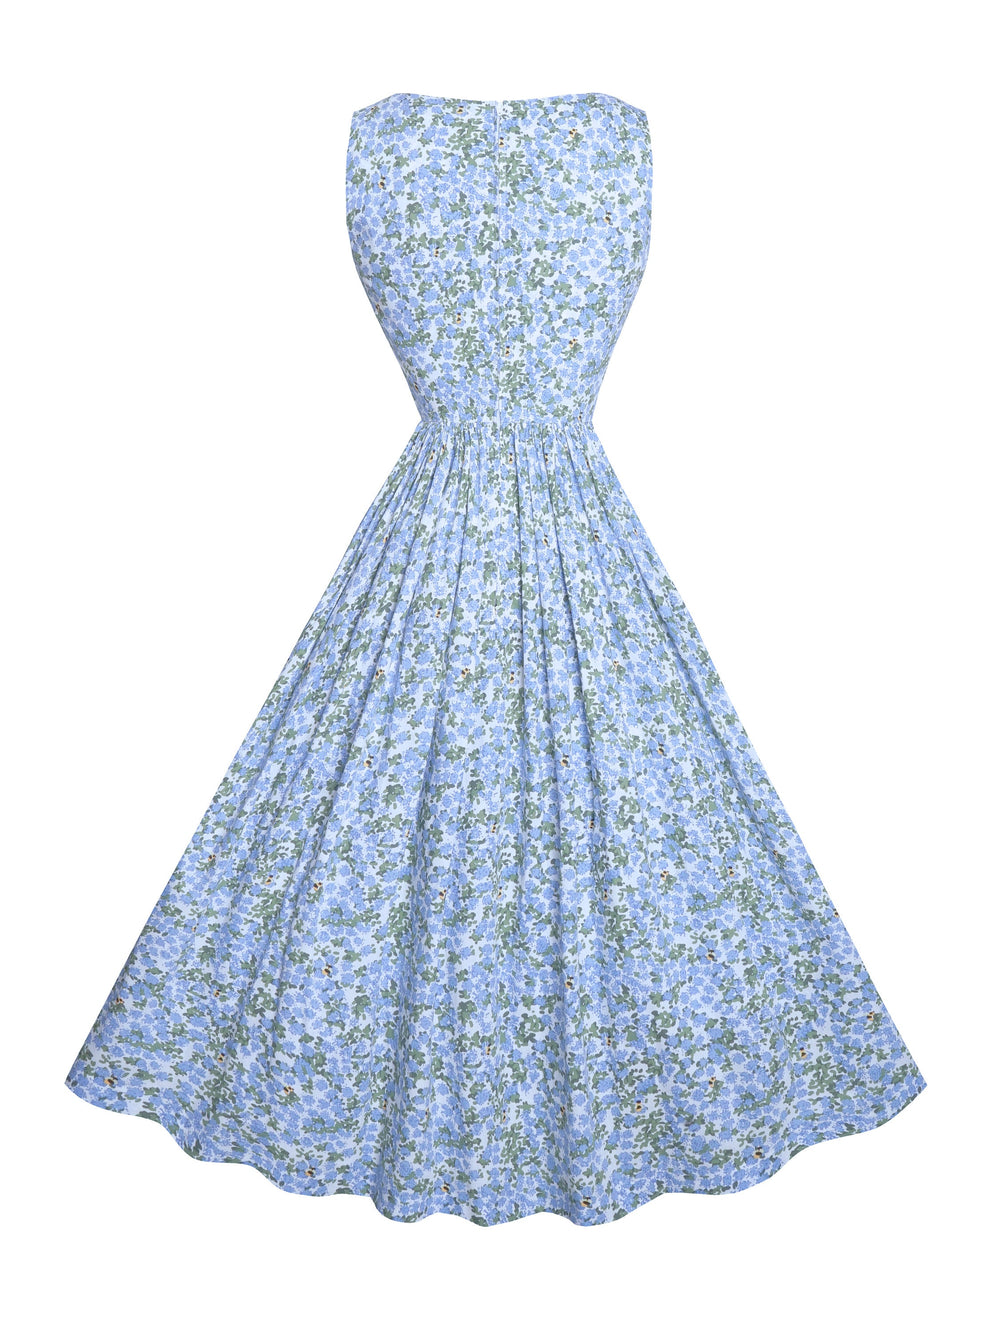 MTO - Audrey Dress "Beeloved Blooms"